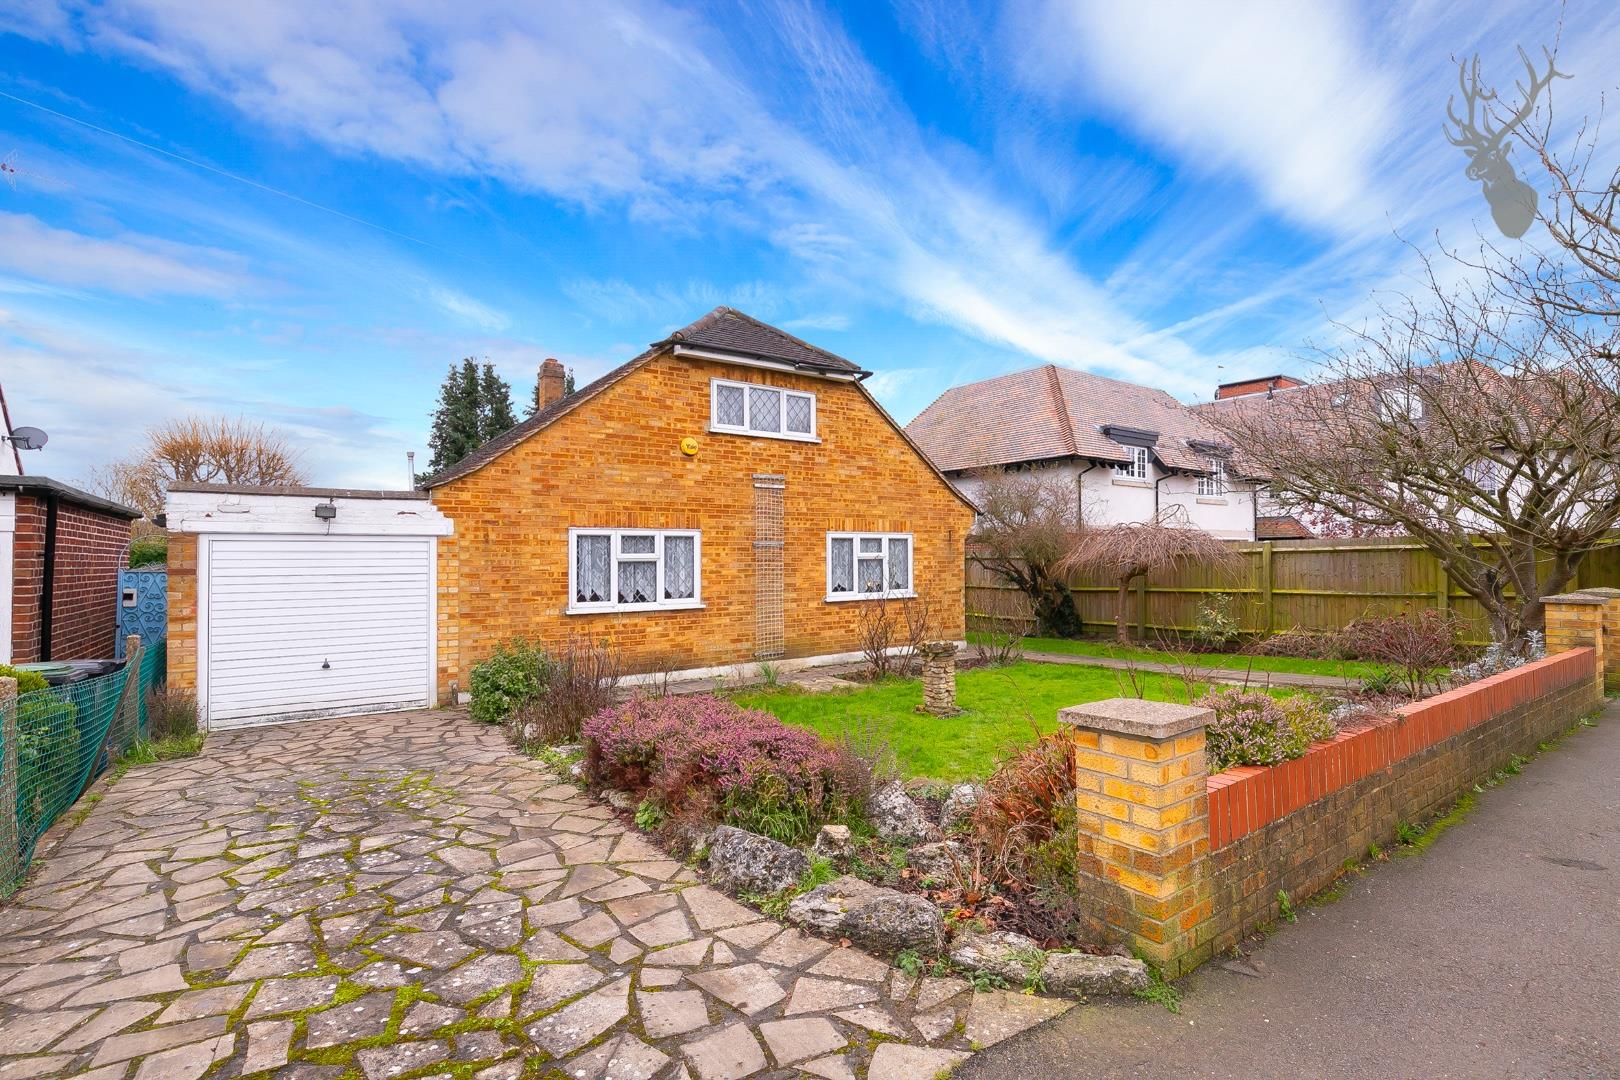 Similar Property: Bungalow - Detached in Theydon Bois